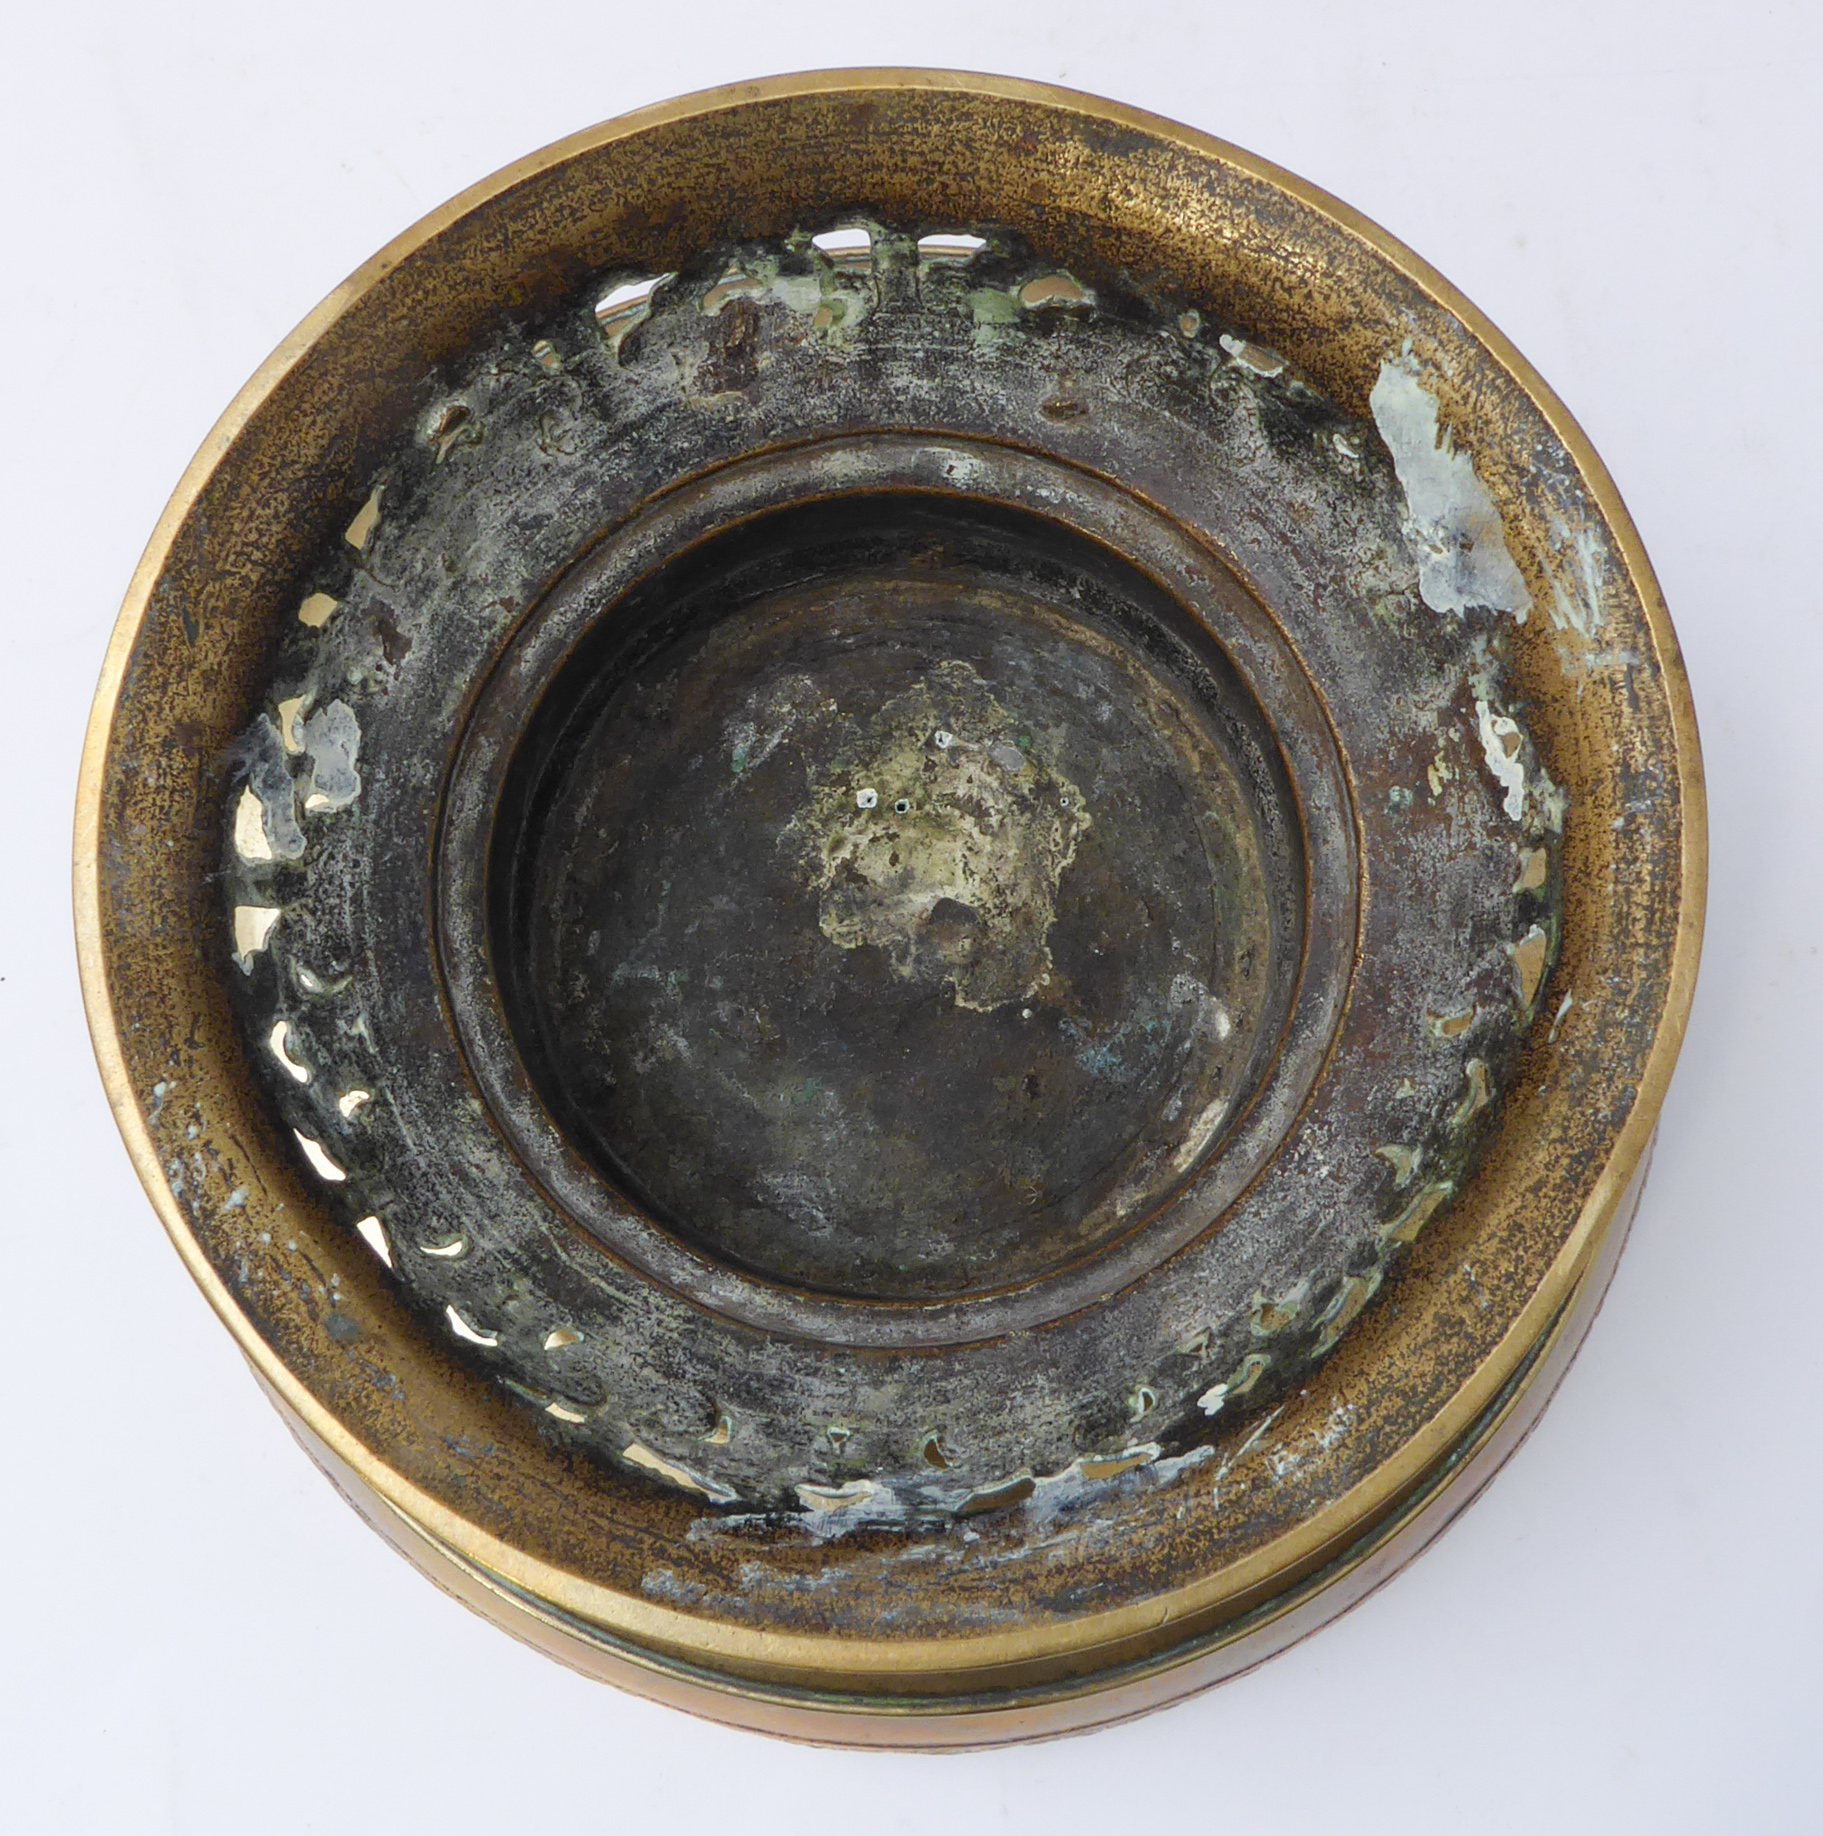 A Chinese brass footed bowl with repoussé banded decoration and pierced foot rim. (A/F) (rim - Image 3 of 3